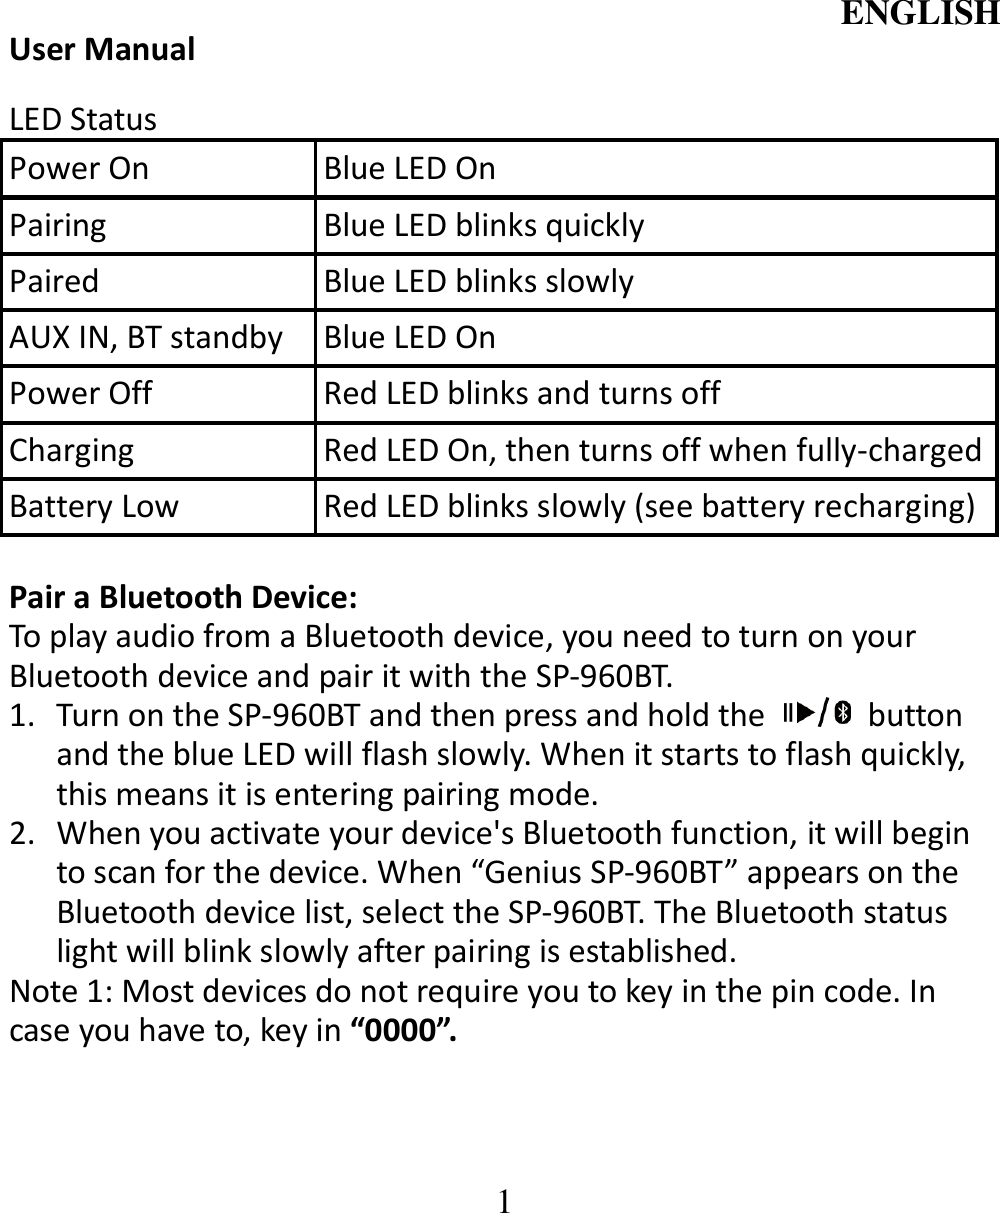 ENGLISH  1 User Manual  LED Status Power On  Blue LED On Pairing  Blue LED blinks quickly Paired  Blue LED blinks slowly AUX IN, BT standby  Blue LED On Power Off  Red LED blinks and turns off   Charging  Red LED On, then turns off when fully-charged Battery Low    Red LED blinks slowly (see battery recharging)  Pair a Bluetooth Device:   To play audio from a Bluetooth device, you need to turn on your Bluetooth device and pair it with the SP-960BT. 1. Turn on the SP-960BT and then press and hold the    button and the blue LED will flash slowly. When it starts to flash quickly, this means it is entering pairing mode. 2. When you activate your device&apos;s Bluetooth function, it will begin to scan for the device. When “Genius SP-960BT” appears on the Bluetooth device list, select the SP-960BT. The Bluetooth status light will blink slowly after pairing is established.   Note 1: Most devices do not require you to key in the pin code. In case you have to, key in “0000”. 